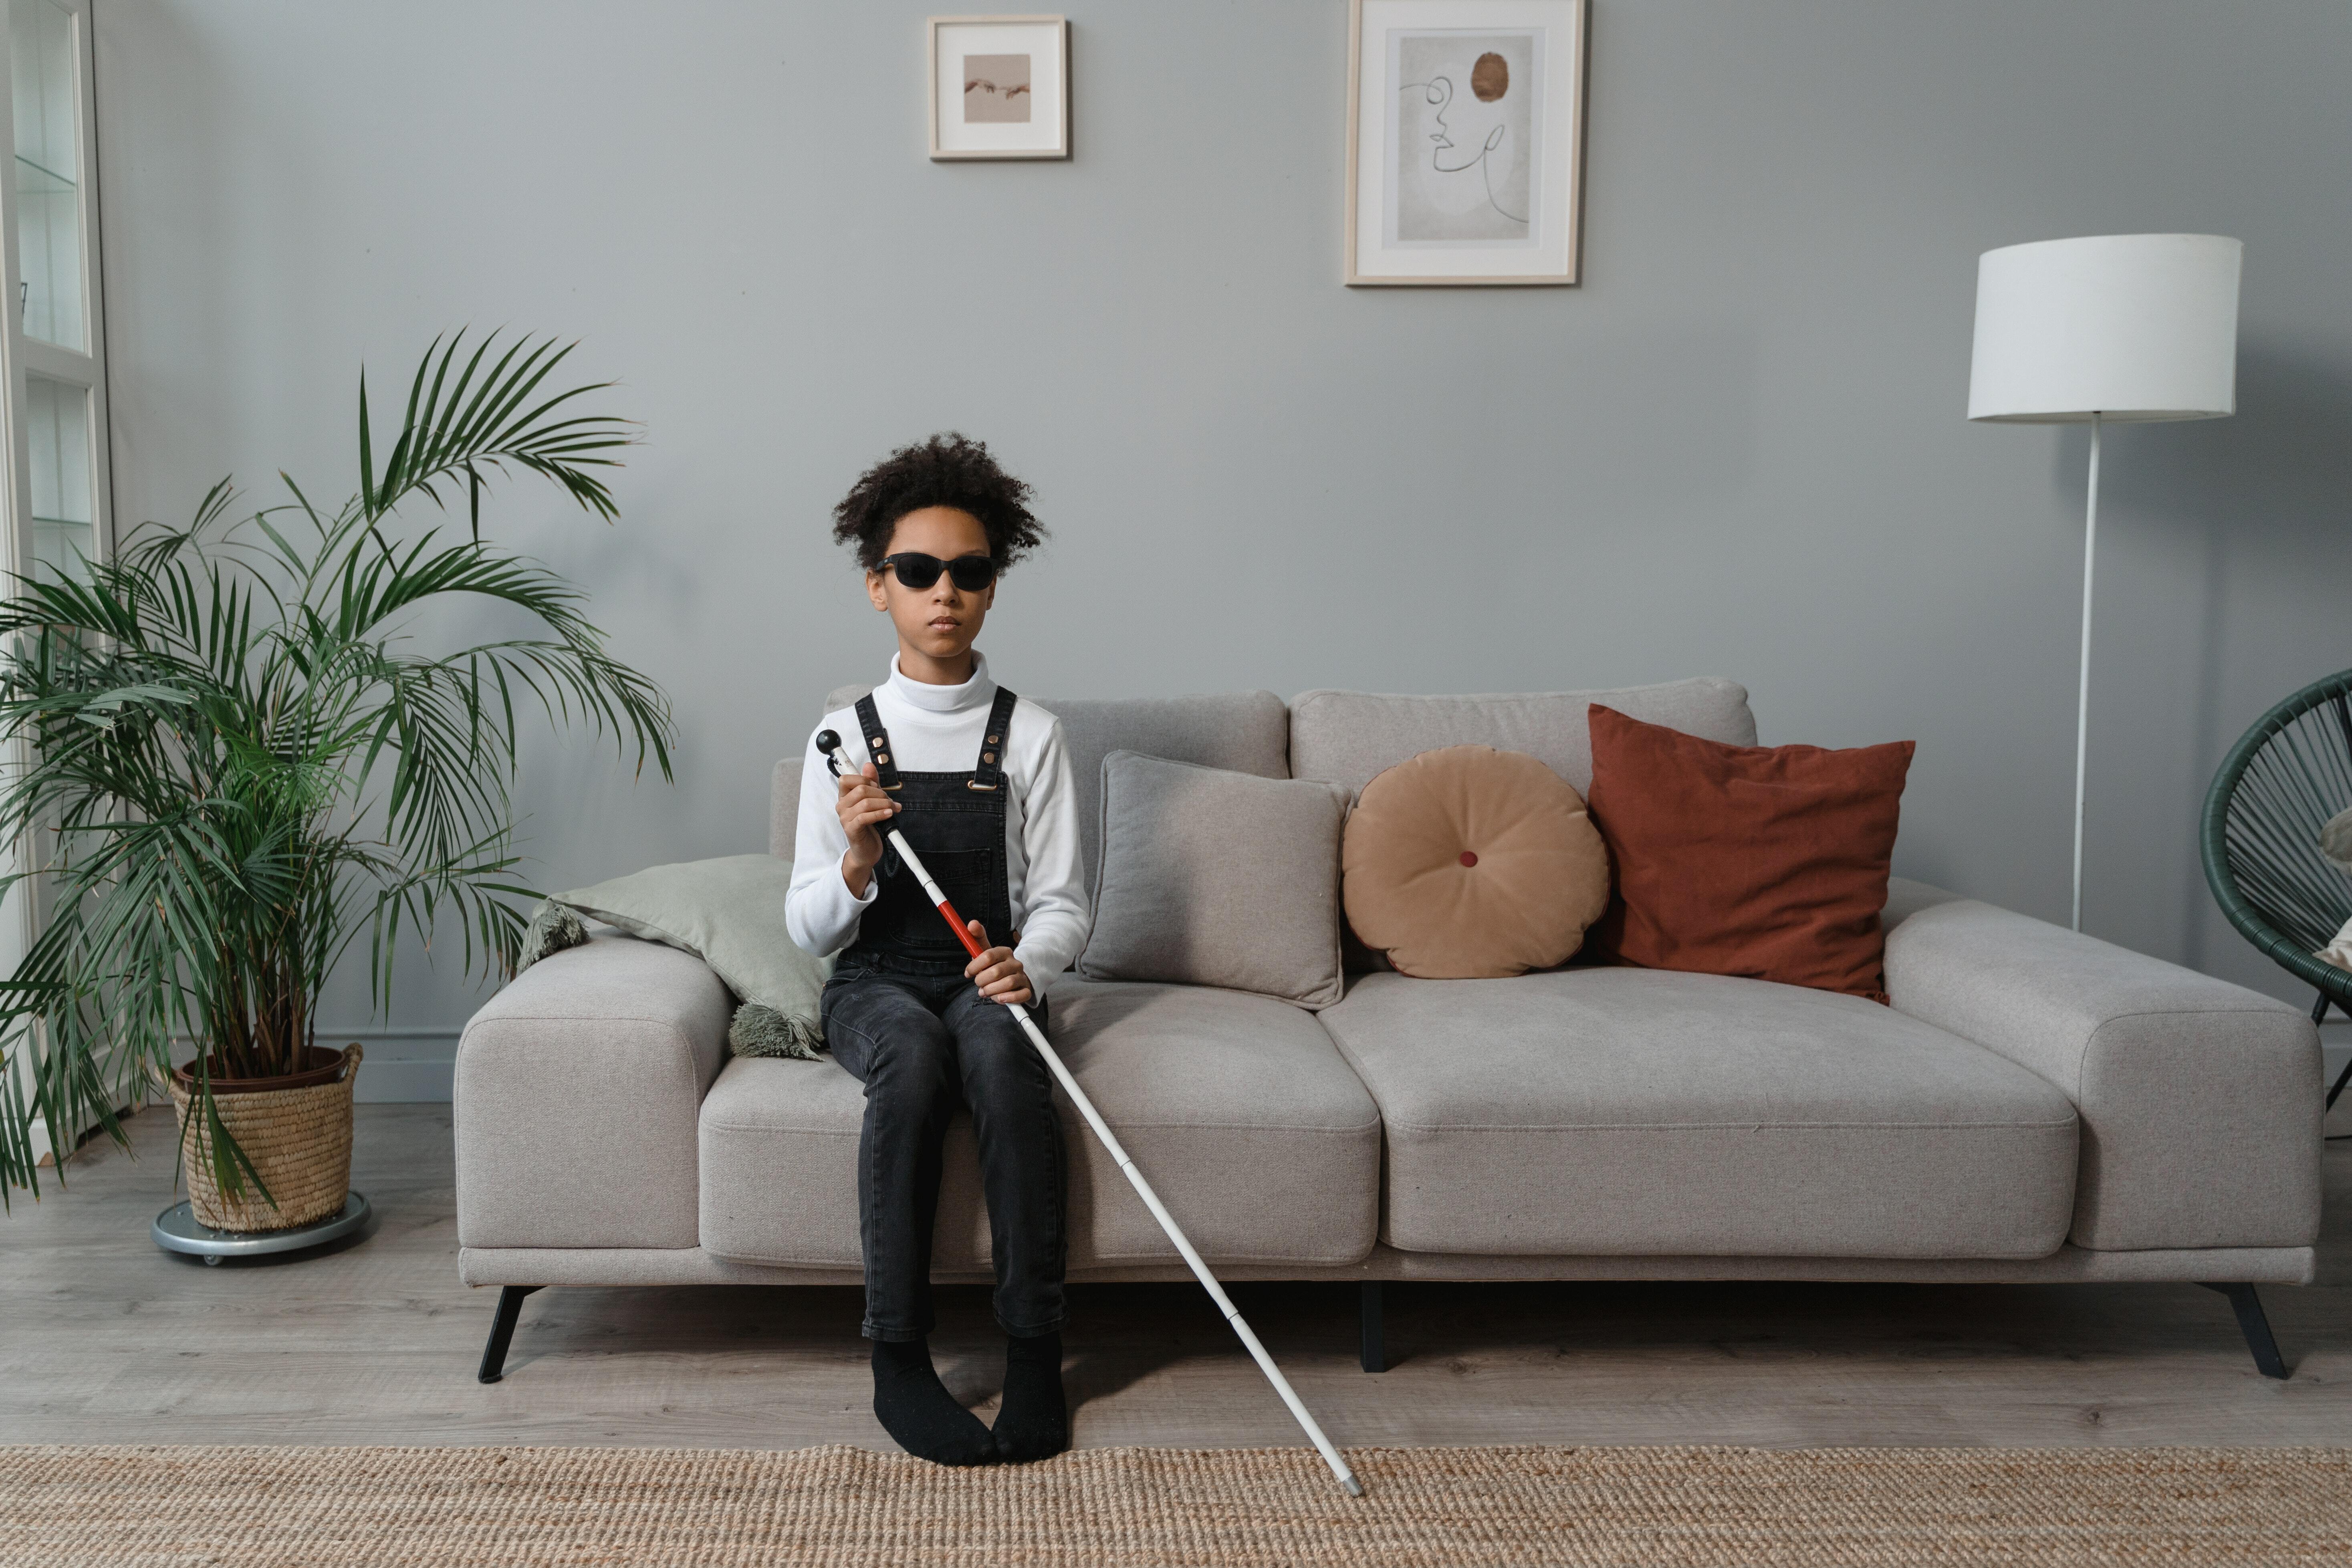 Boy Sitting on Gray Couch Holding a White Cane